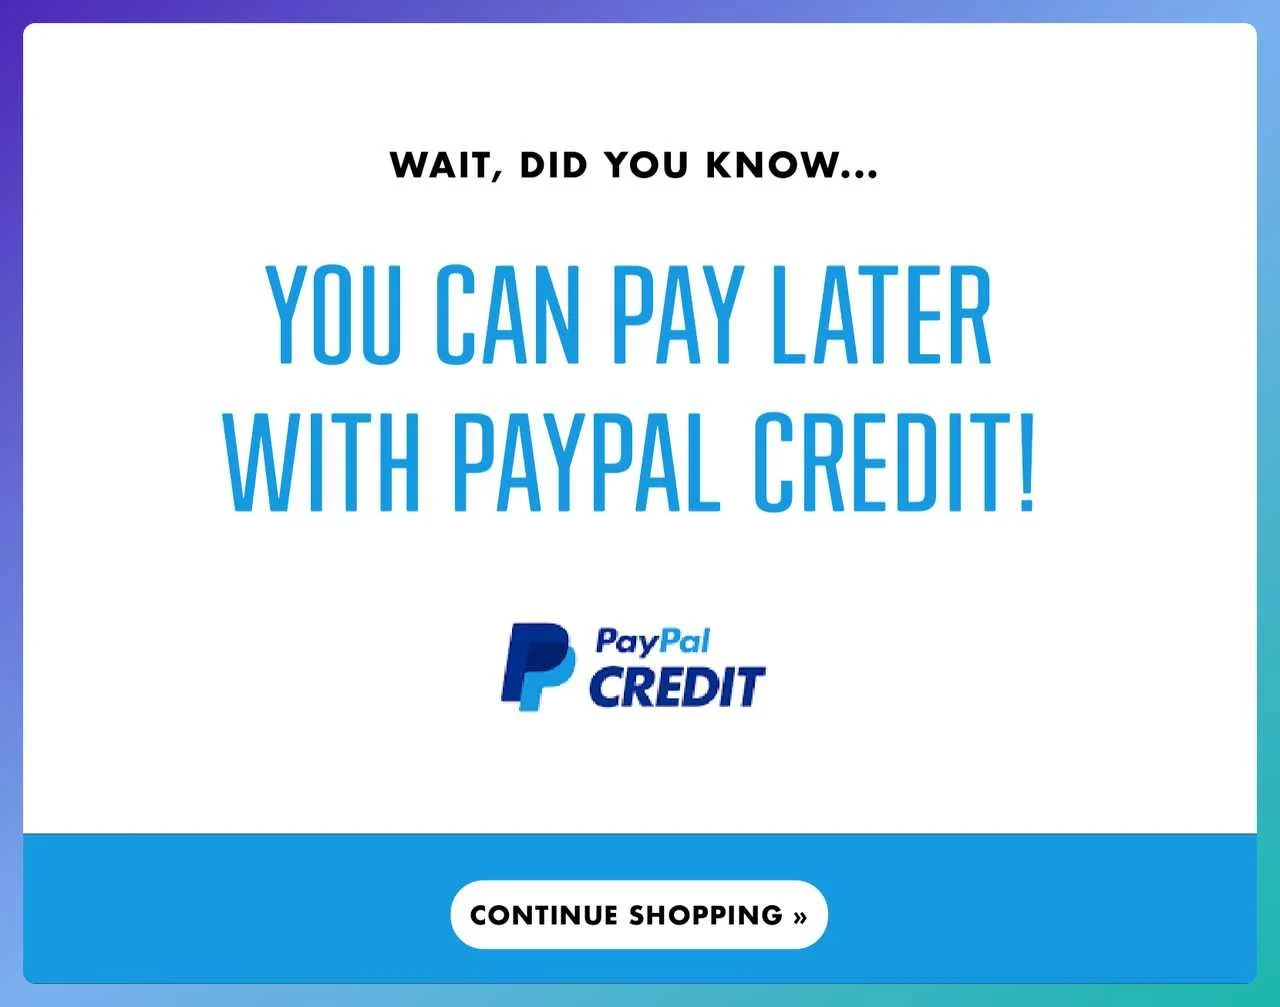 a screenshot of a cart abandonment popup example in blue theme showing different Payment method with a text that says "YOU CAN PAY LATER
WITH PAYPAL CREDIT!"